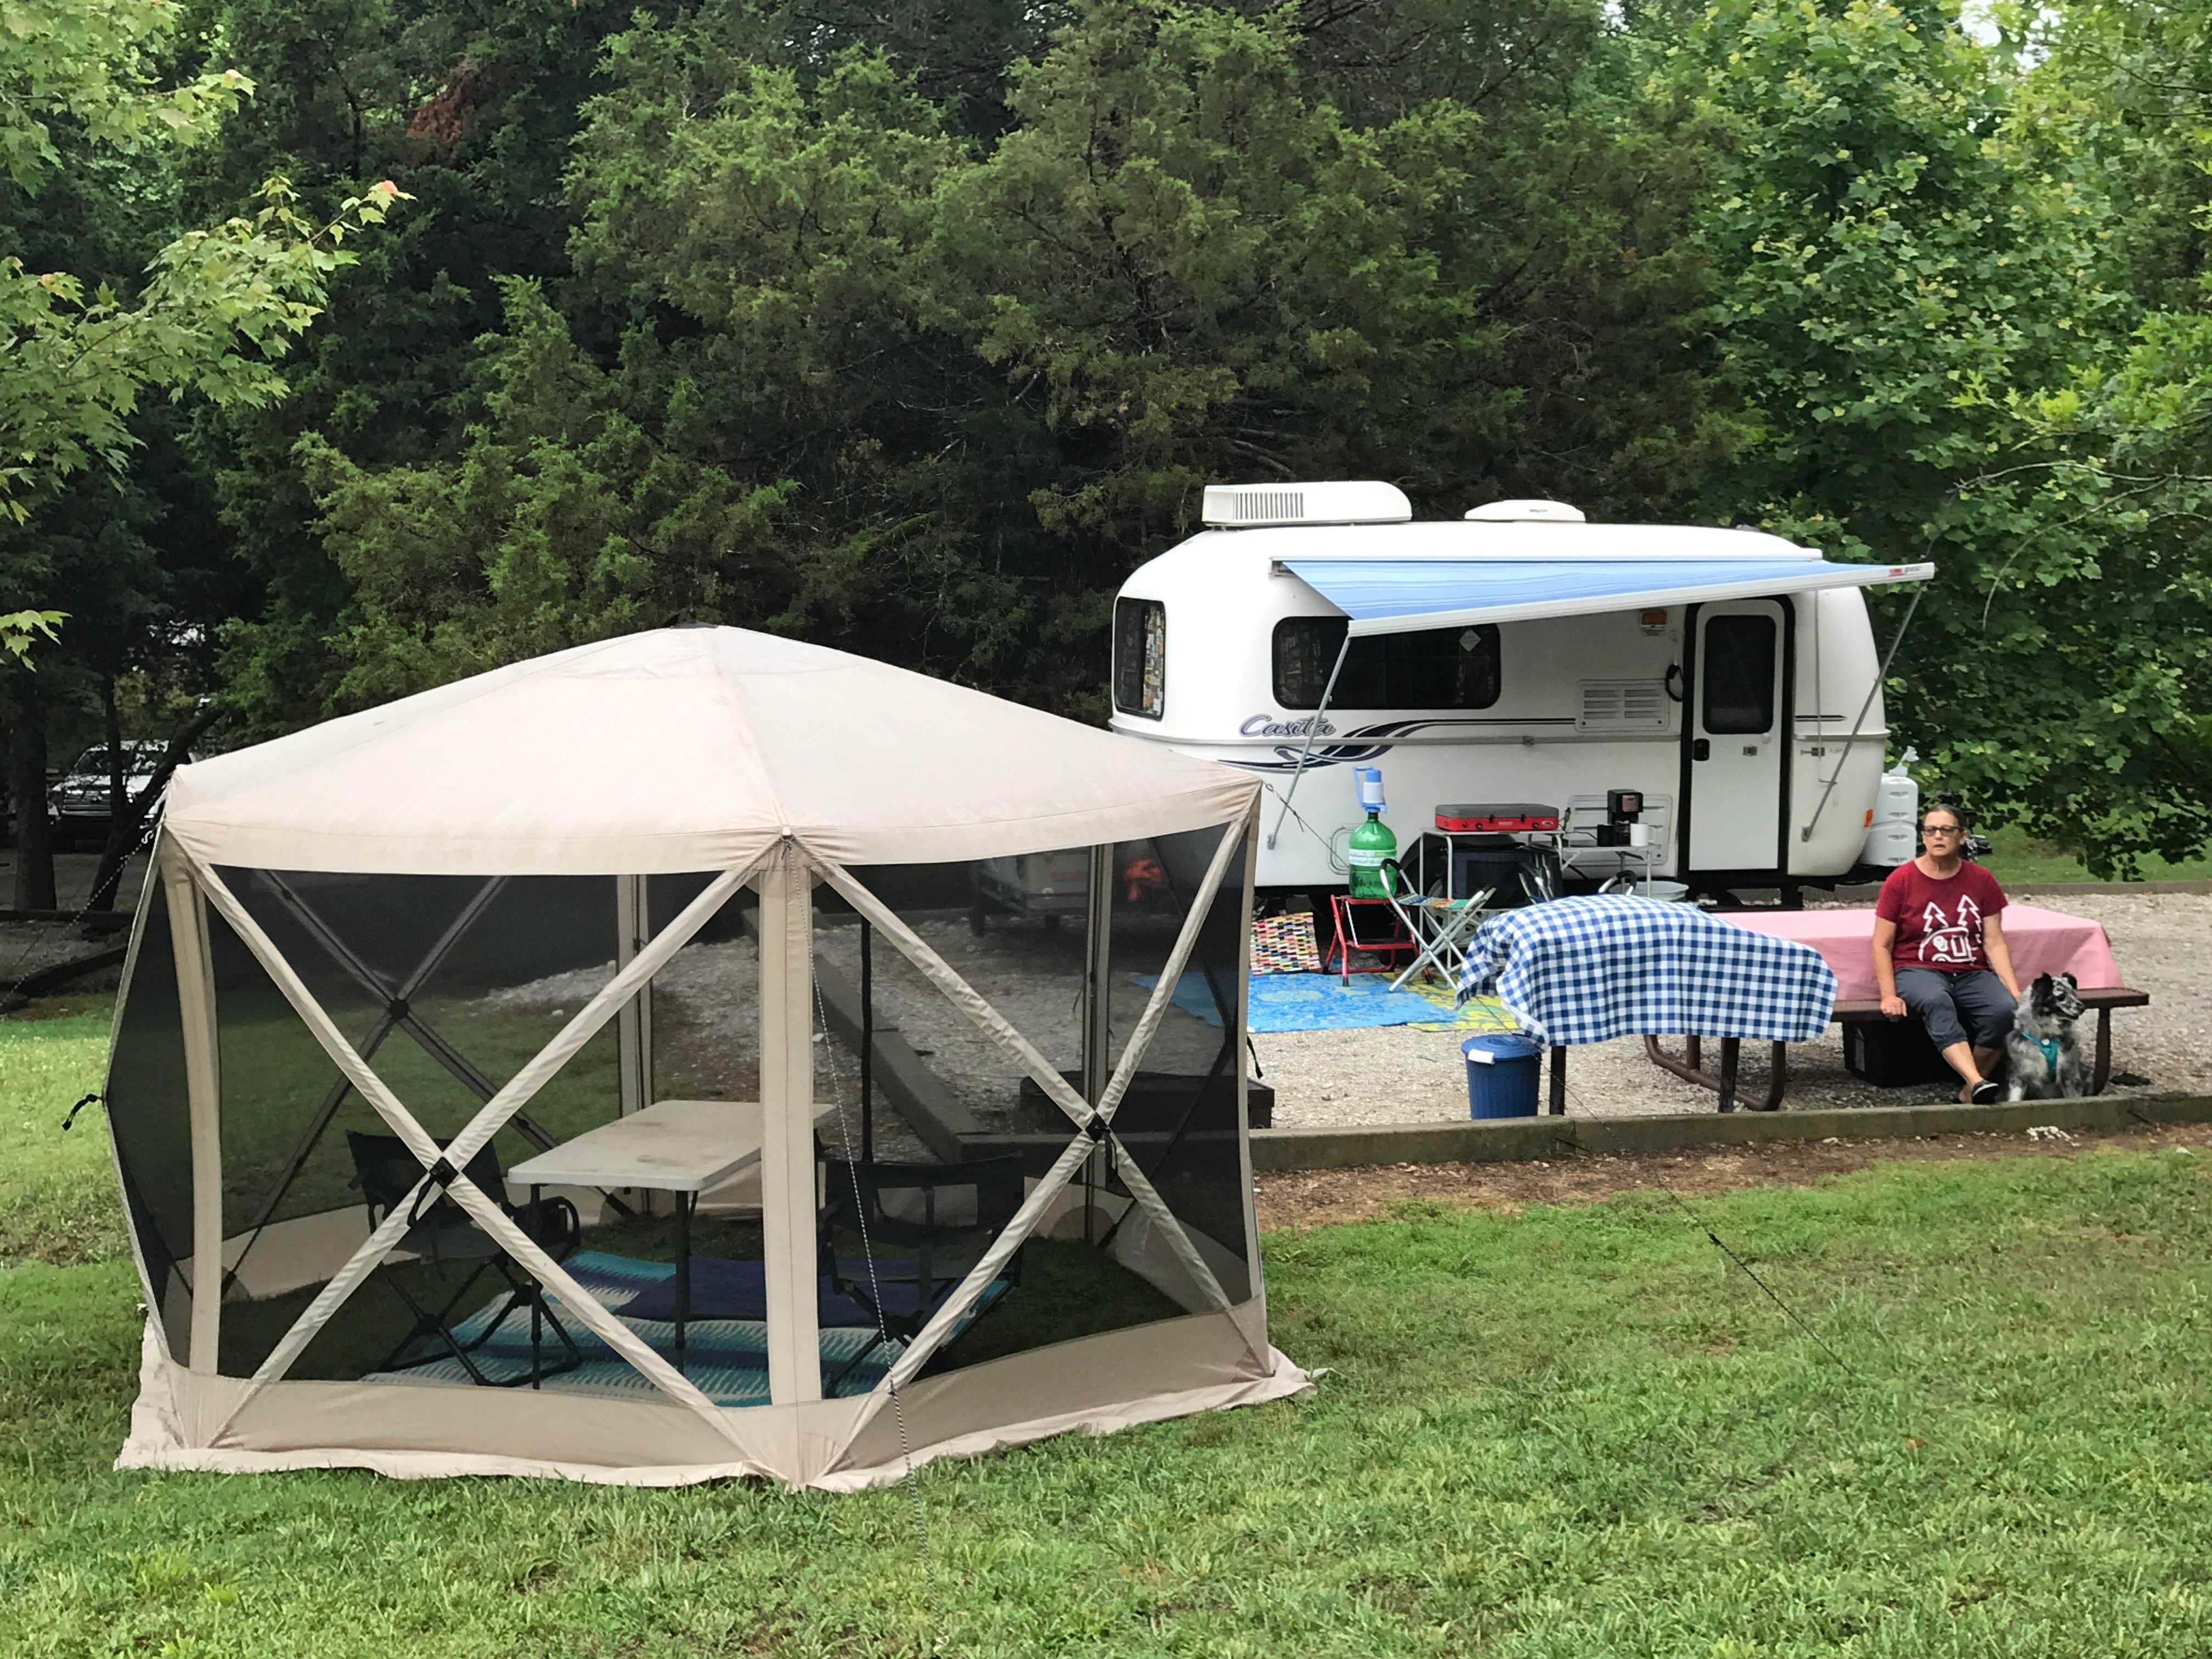 Camper submitted image from Wax - Nolin River Lake - 5